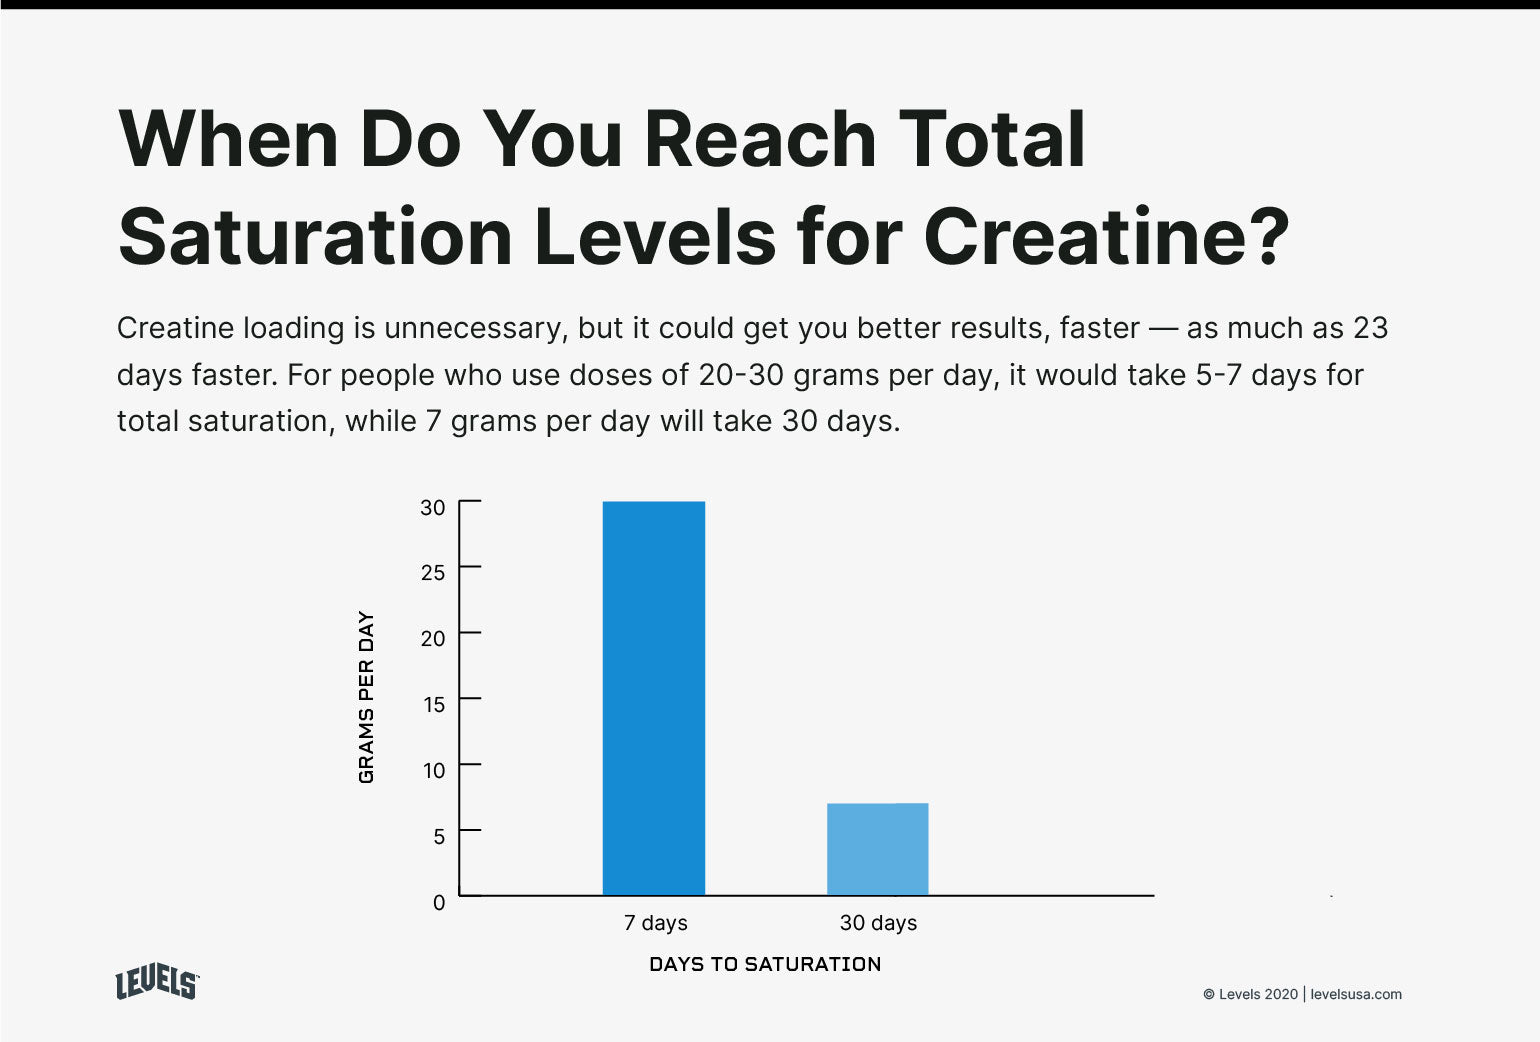 When Do You Reach Total Saturation Levels for Creatine - Infographic